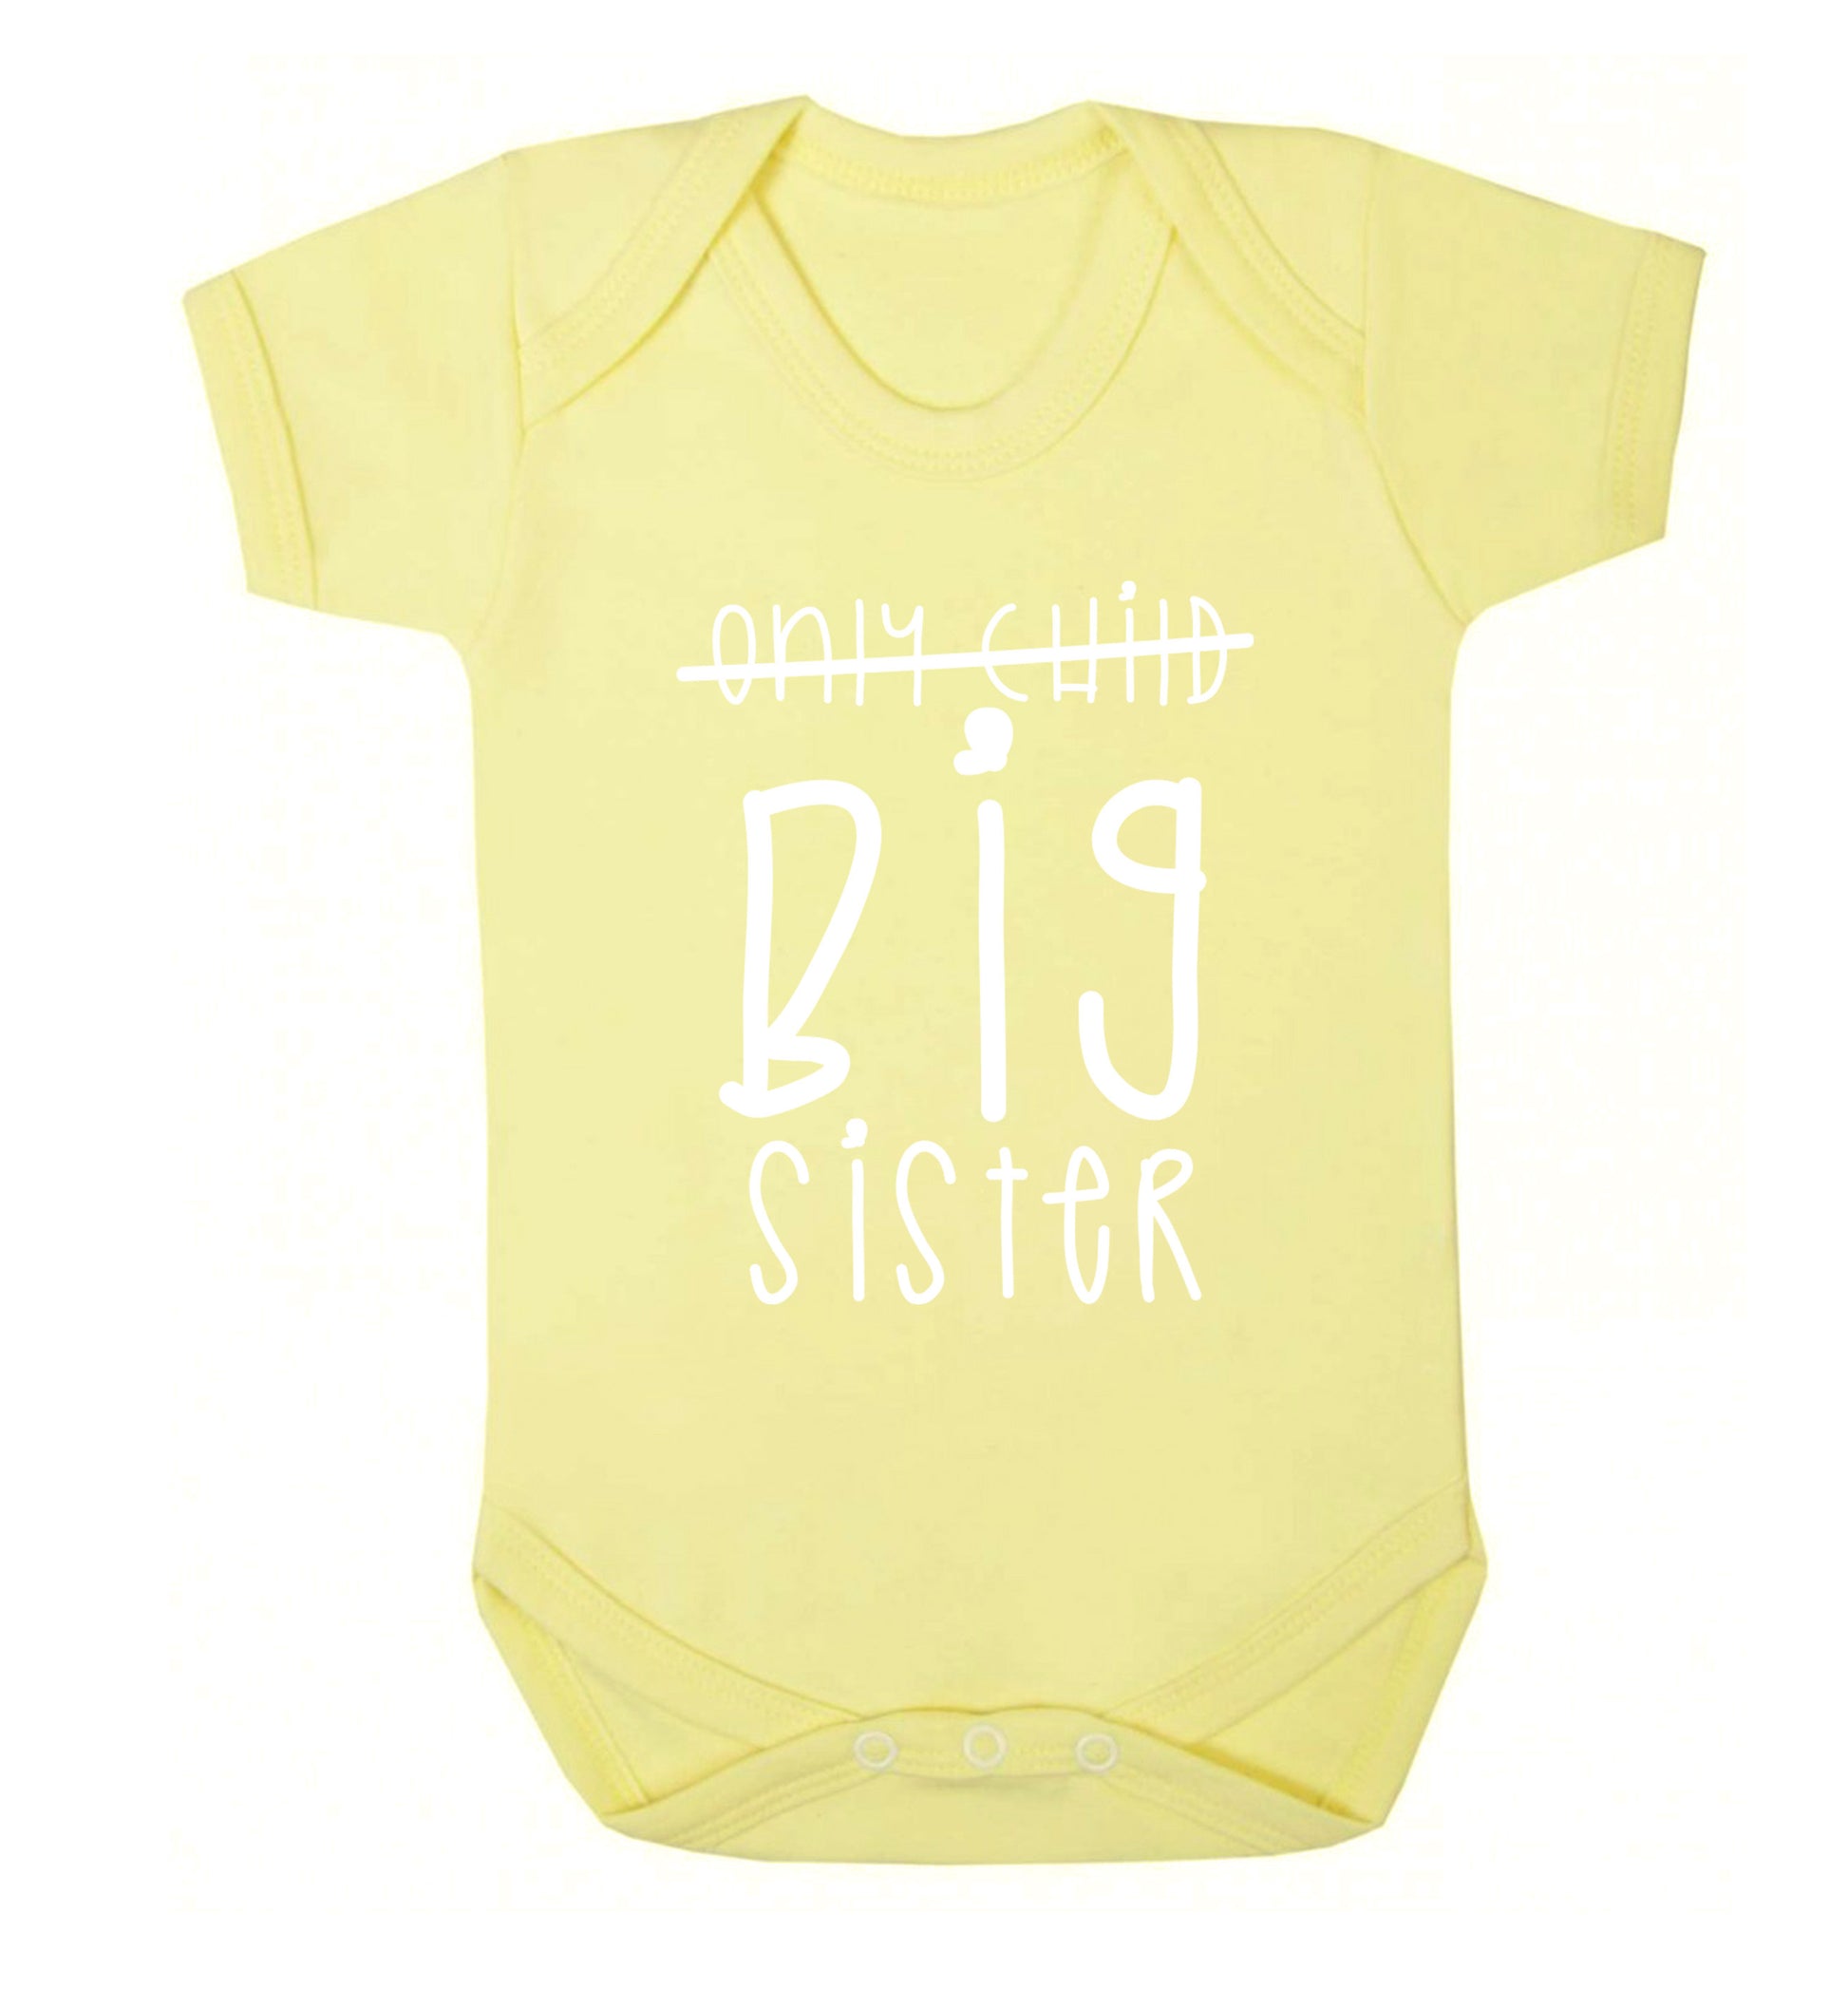 Only child big sister Baby Vest pale yellow 18-24 months